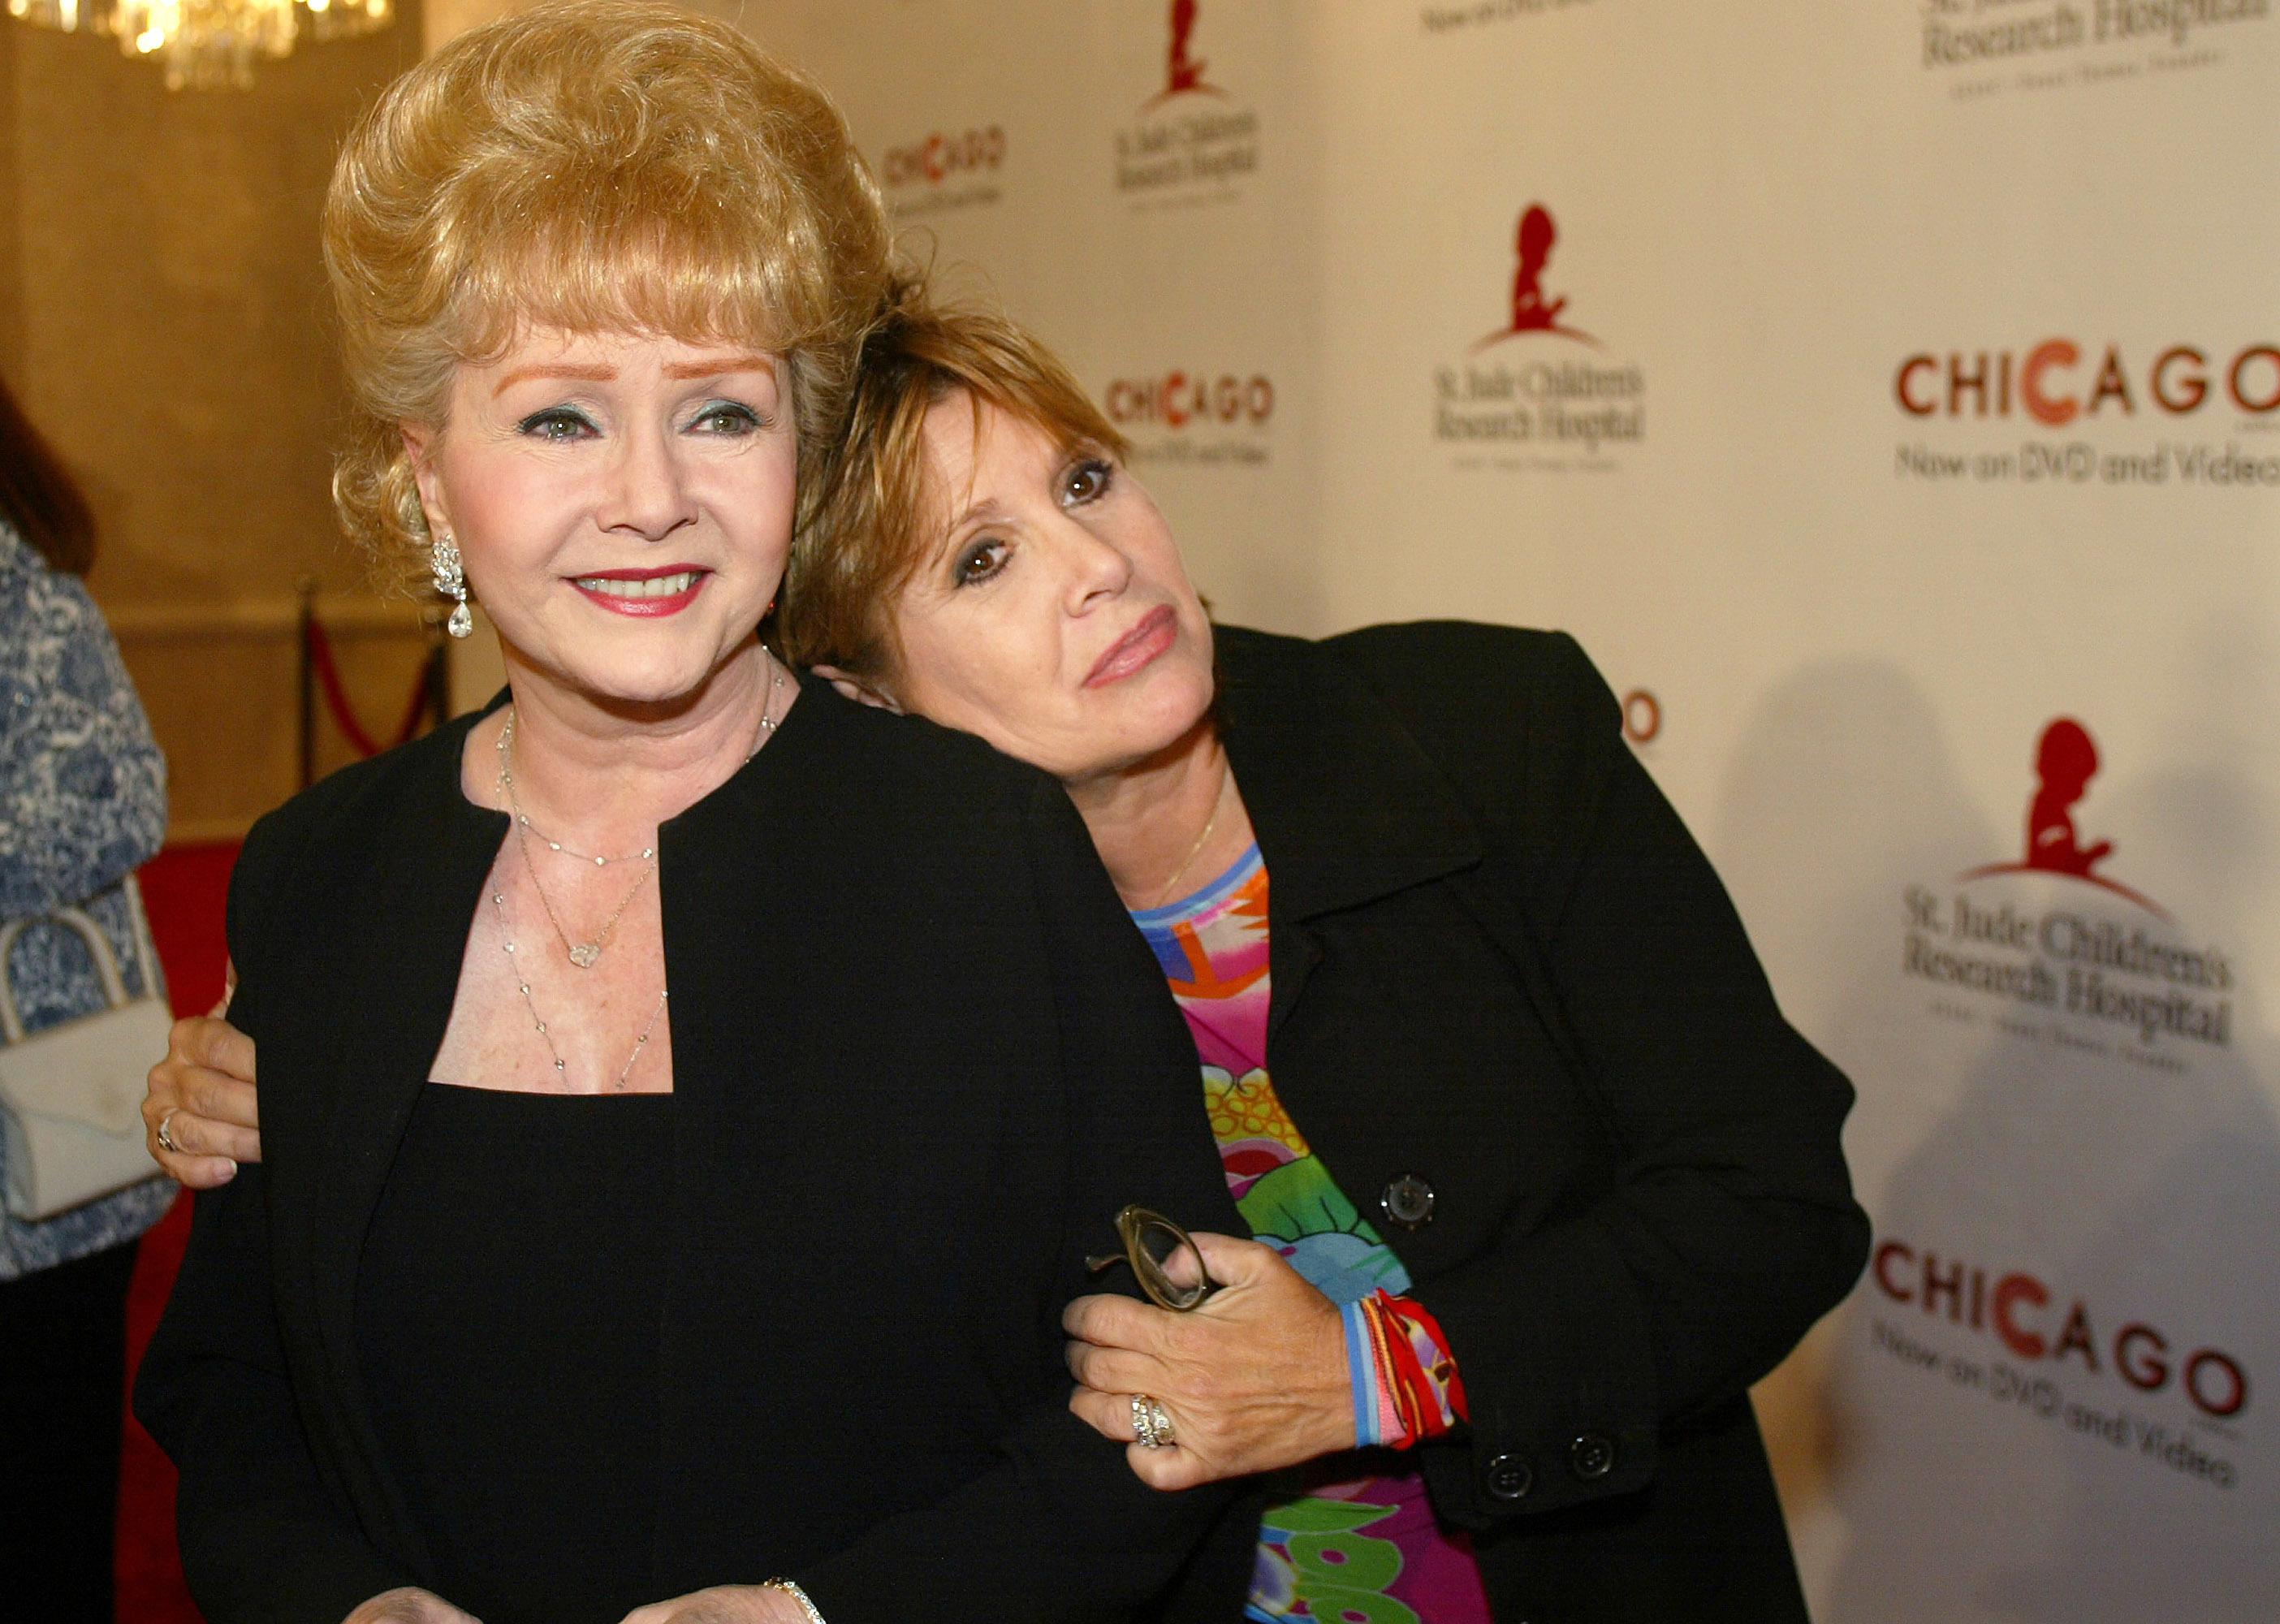 Debbie Reynolds, left, and daughter Carrie Fisher are shown together in this Aug. 19, 2003 file photo. (AP Photo/Jill Connelly)